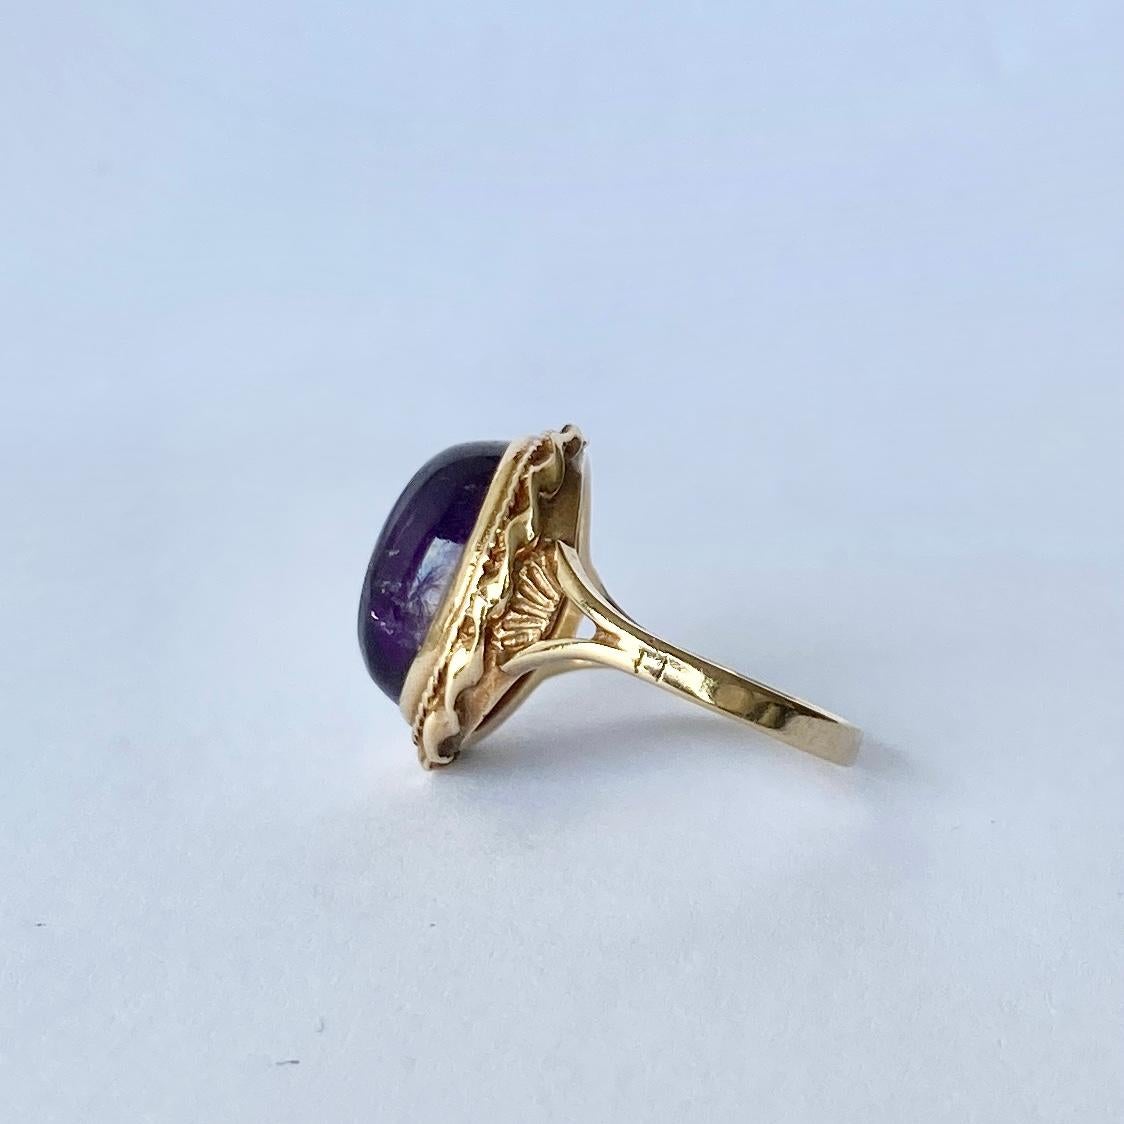 Cabochon Vintage Amethyst and 9 Carat Gold Cocktail Ring